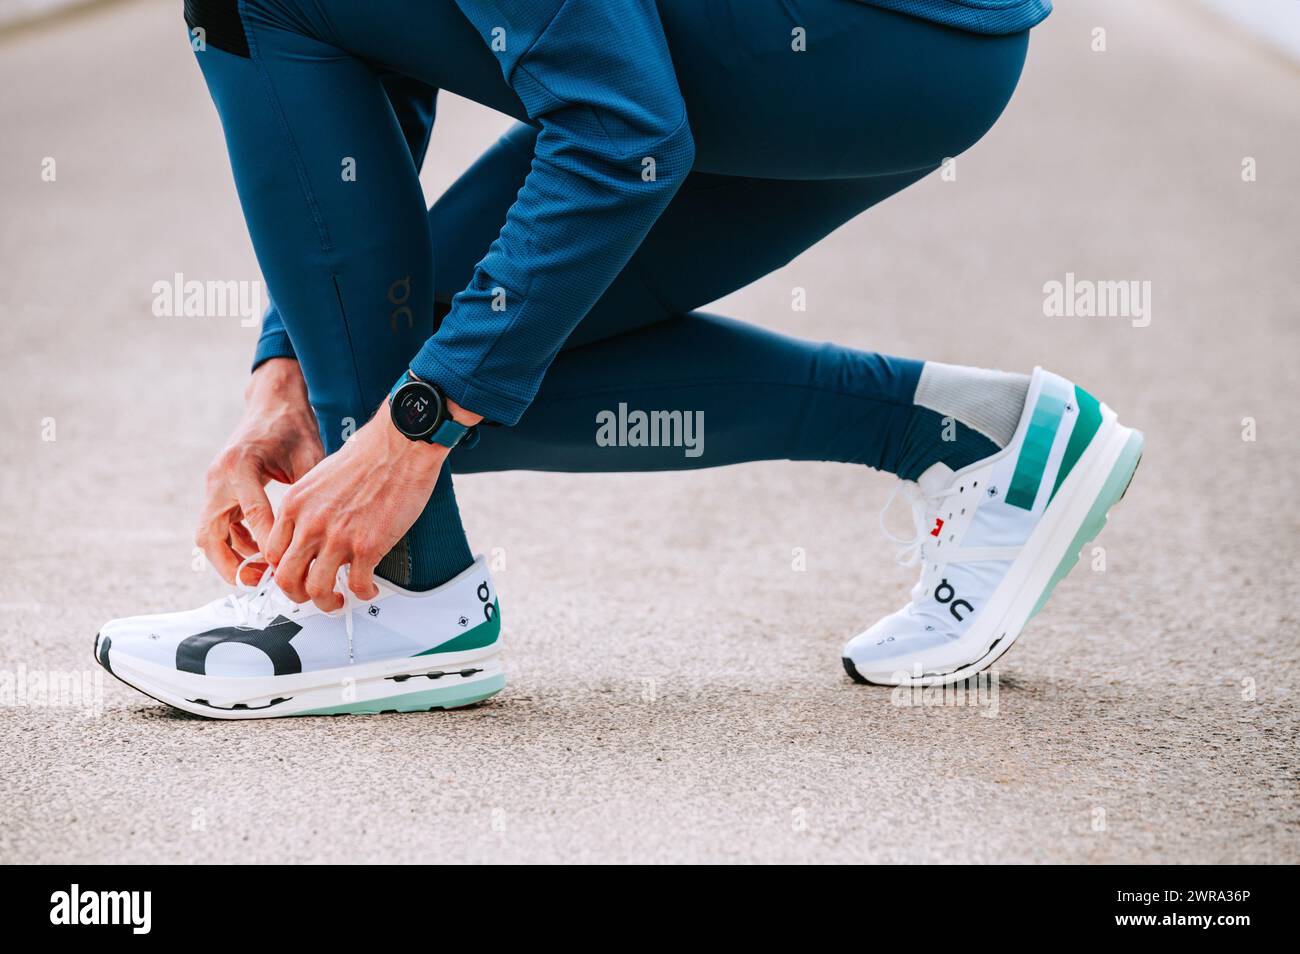 GENEVA, SWITZERLAND, MARCH 10. 2023: On Cloudboom Echo 3, On super shoes, a marathon runner ties his shoes on the road before race. Stock Photo